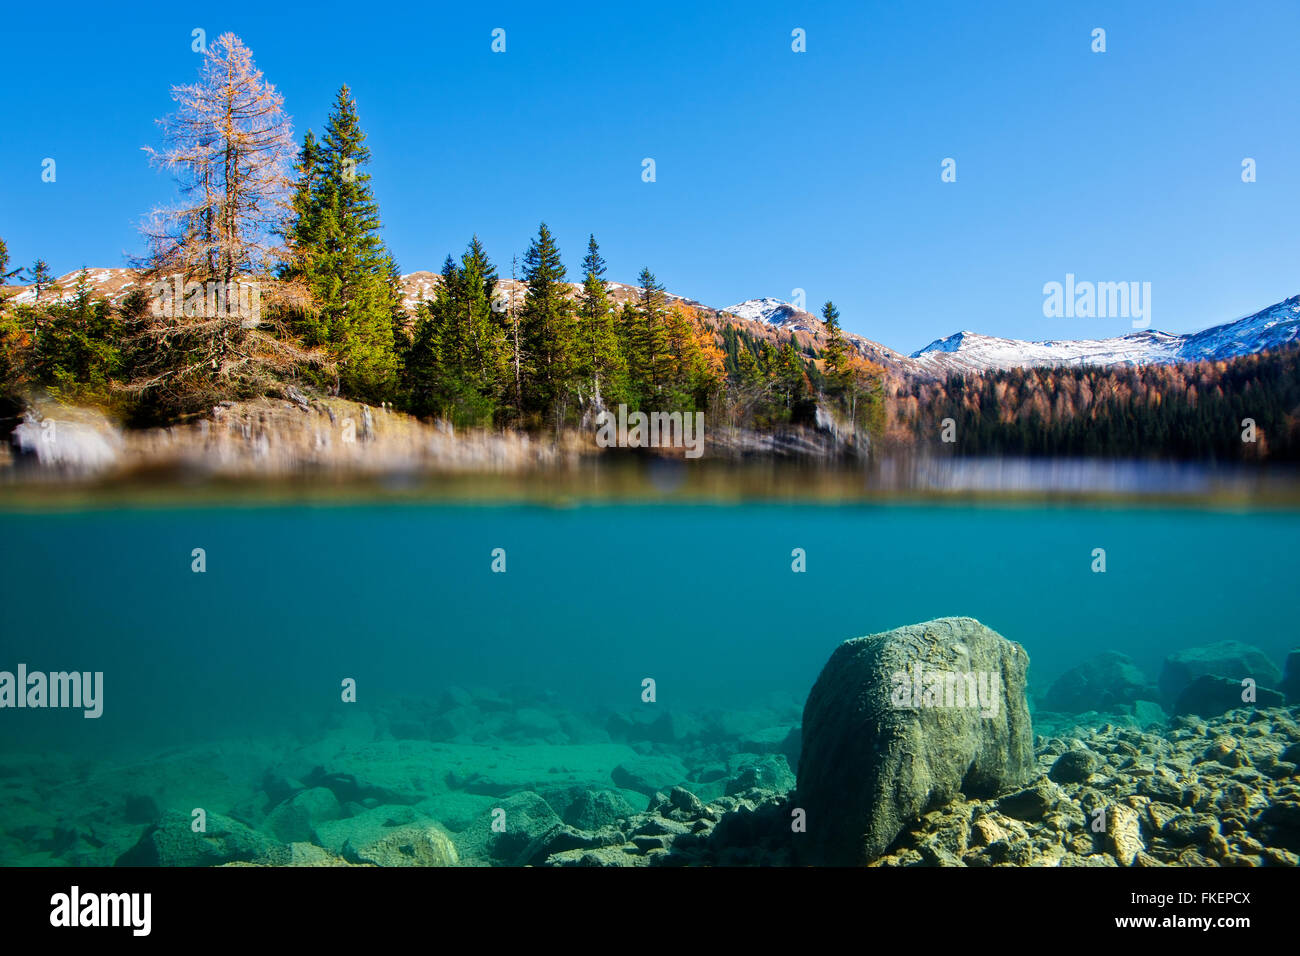 Split picture, Obernberger See underwater picture merged with autumn landscape above water, Zillertal Alps in the back, Tyrol Stock Photo